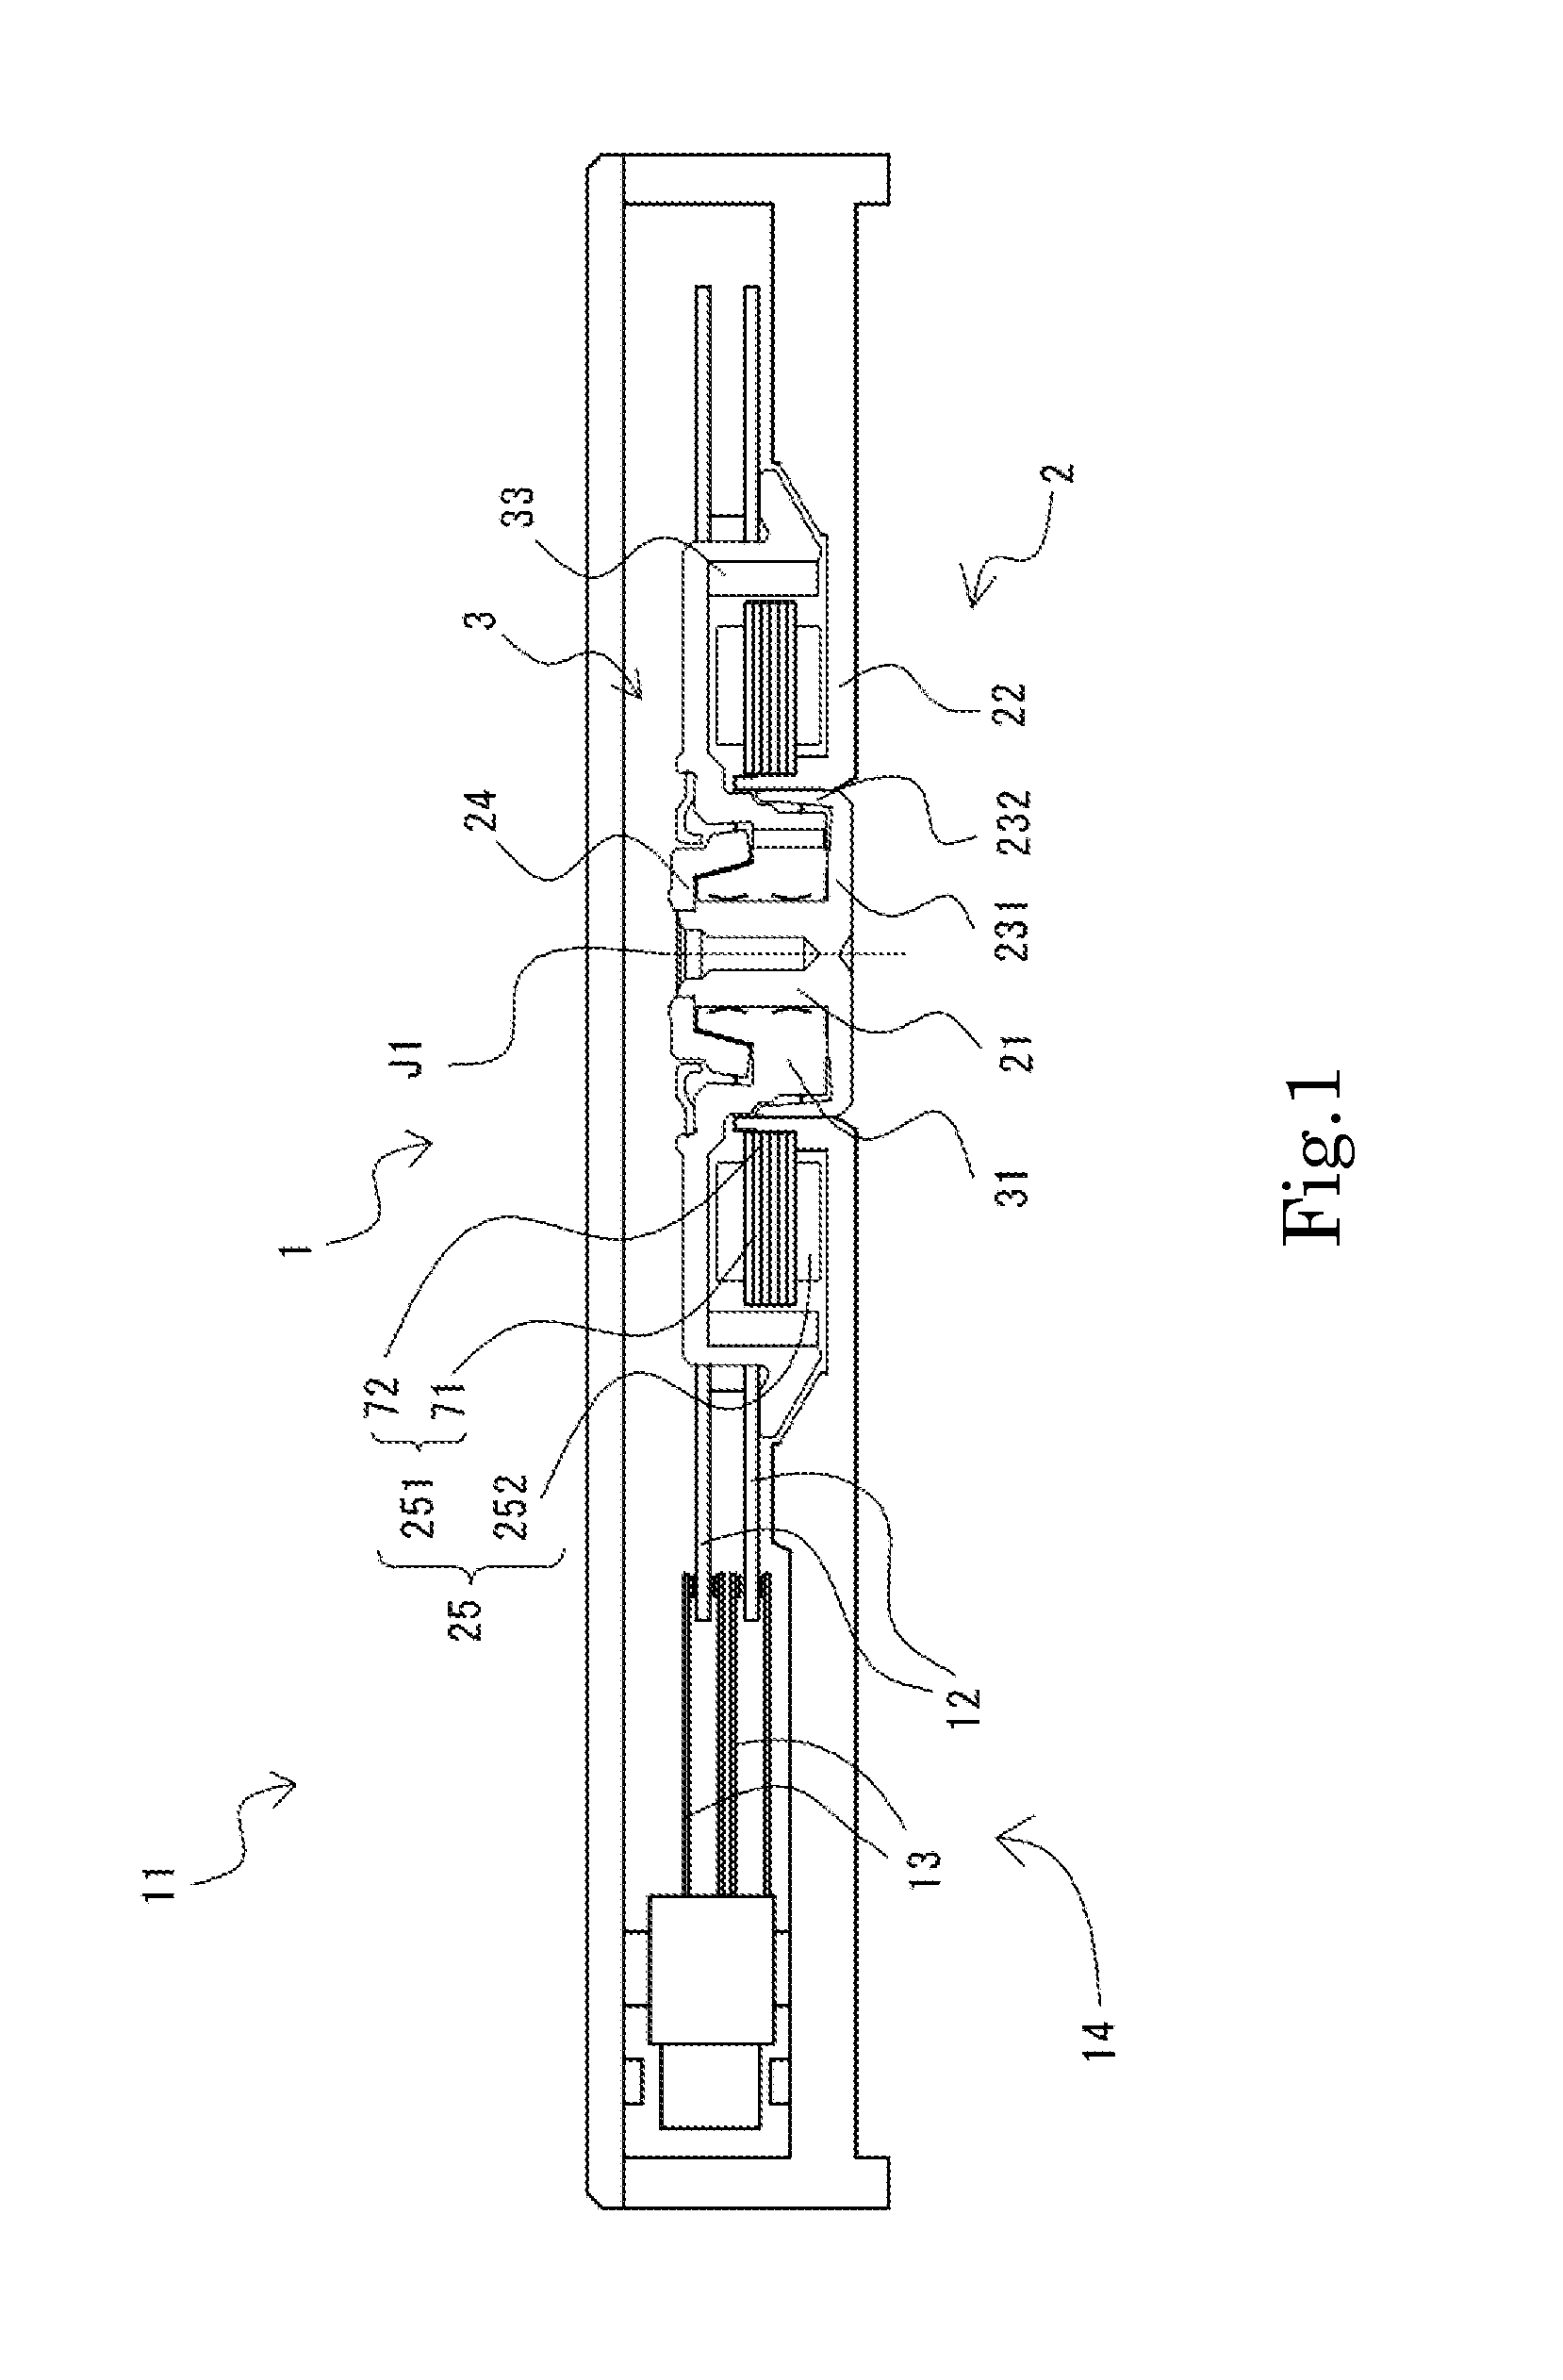 Spindle motor and disk drive apparatus